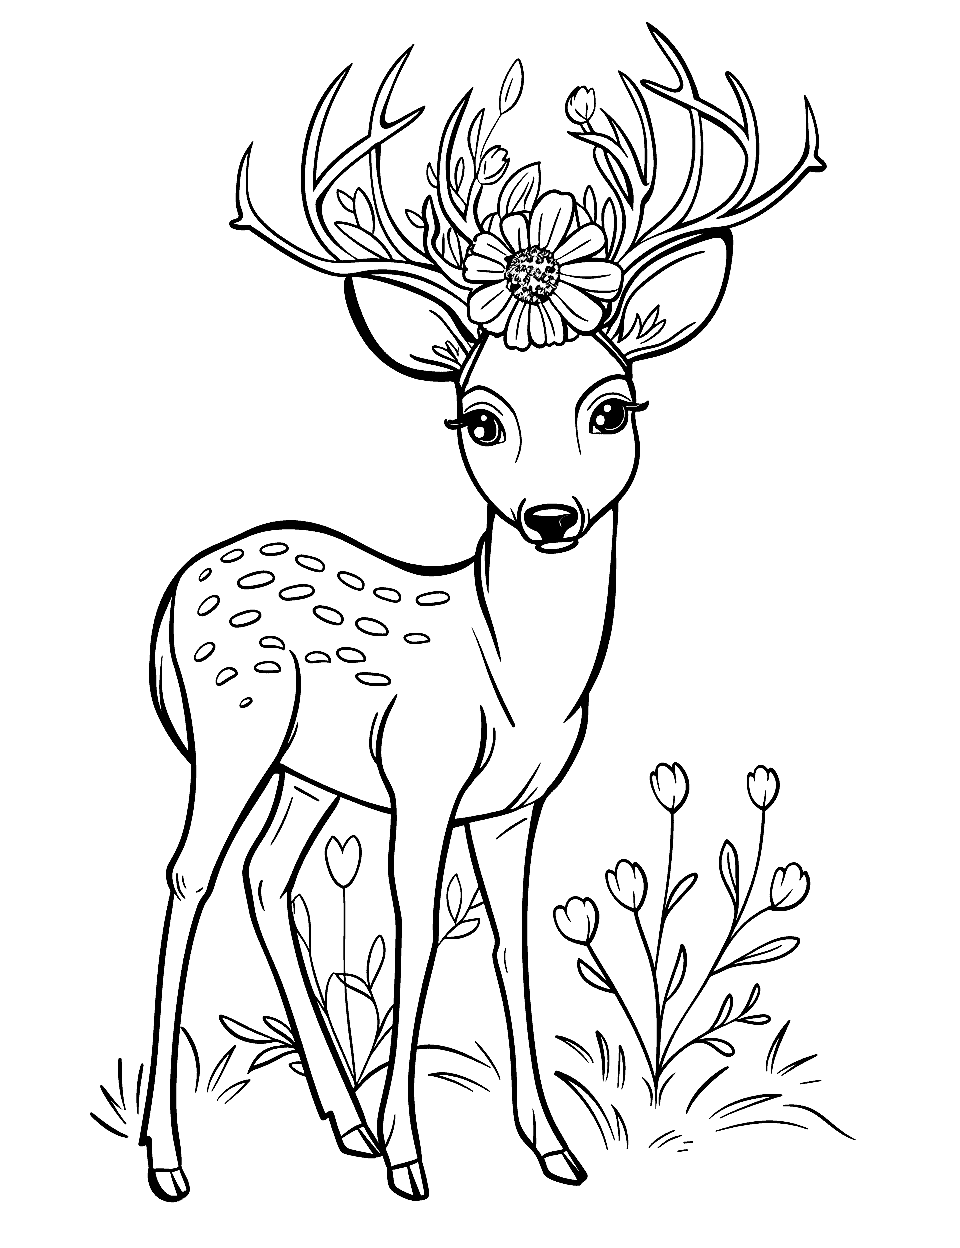 Deer with Flower Crown Coloring Page - A gentle deer adorned with a crown made of wildflowers.